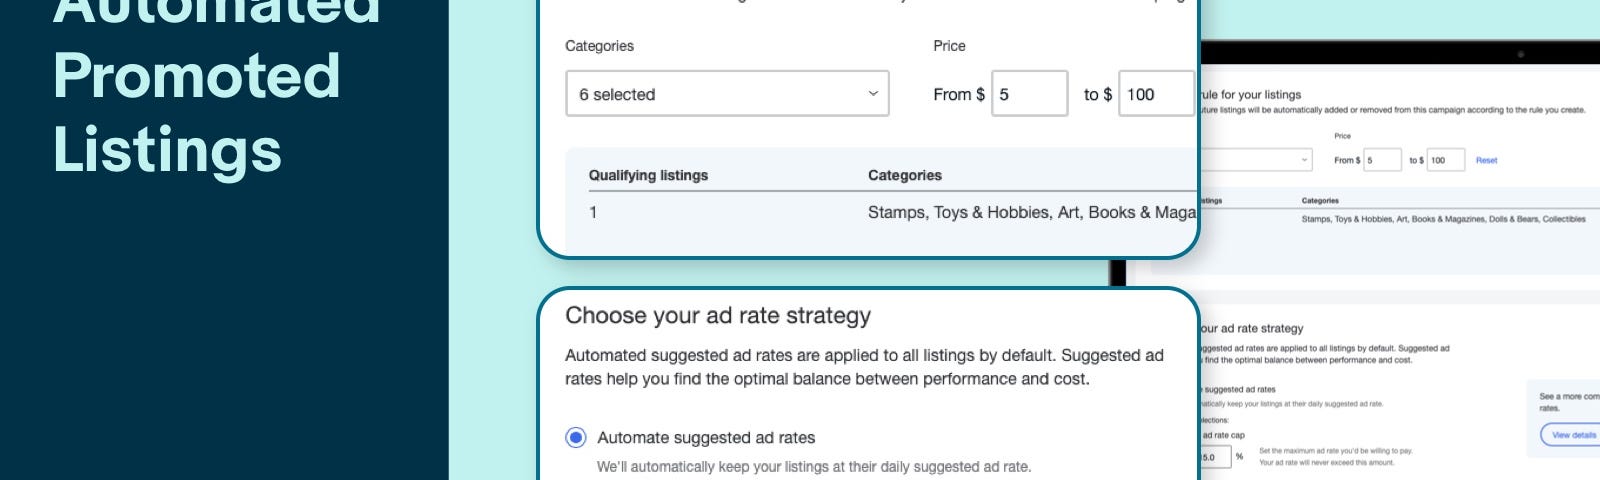 Automated Promoted Listings campaign creation flow